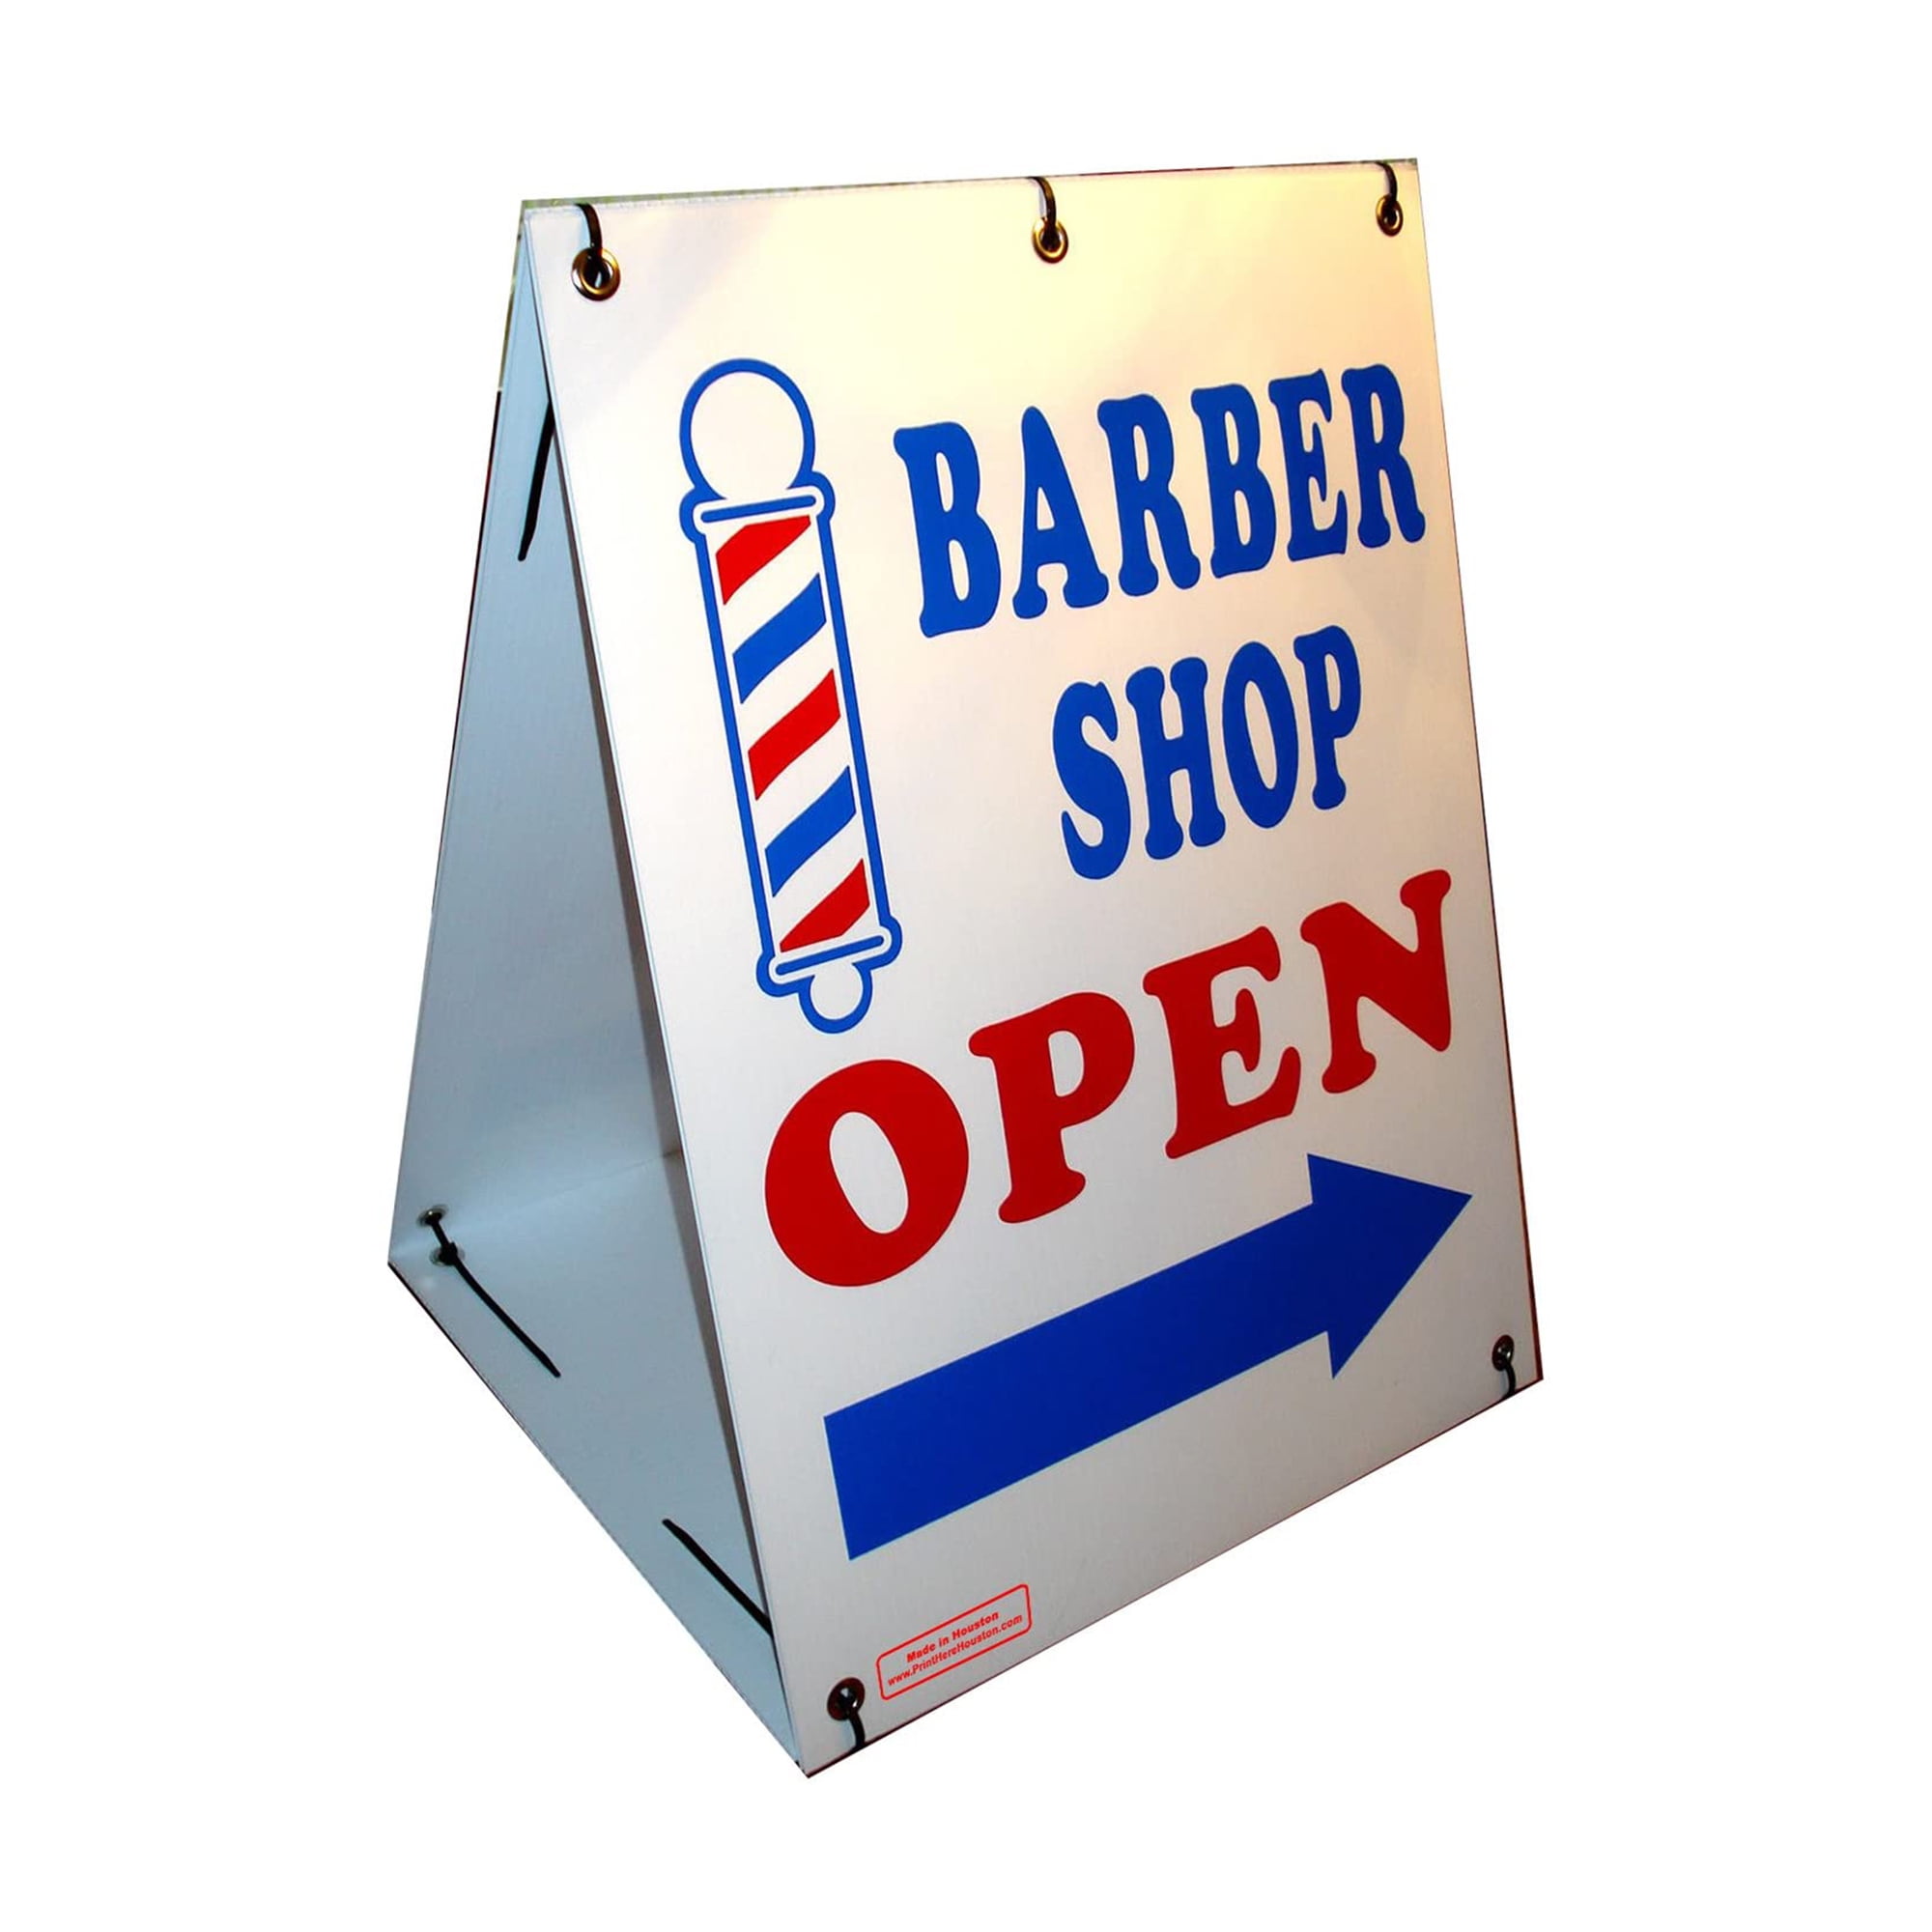 BARBER SHOP OPEN Coroplast SIGN 16X18 with Grommets  NEW White 